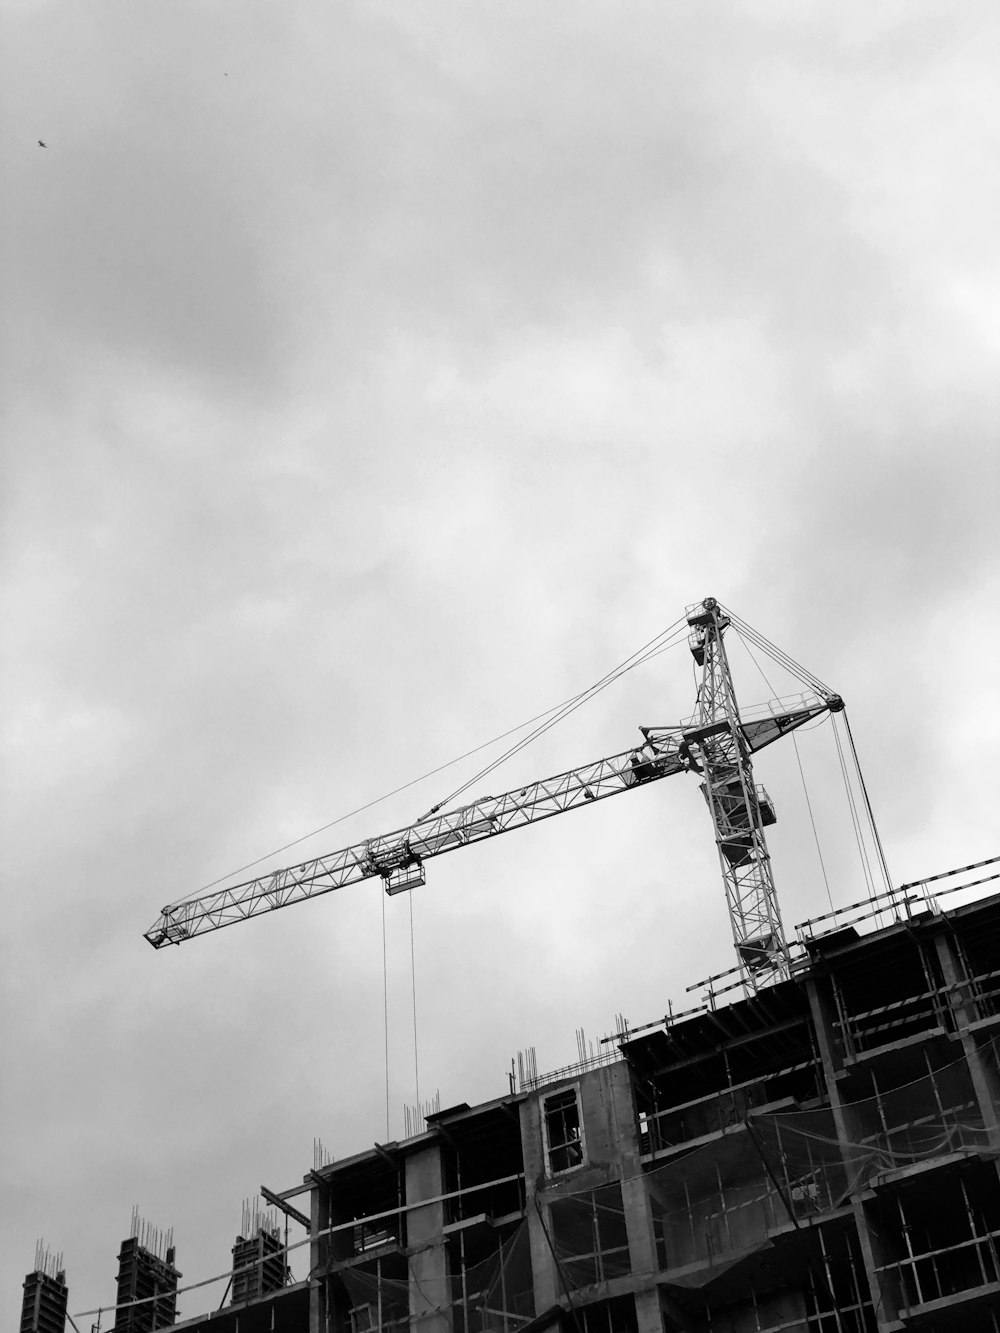 grayscale photo of crane under cloudy sky